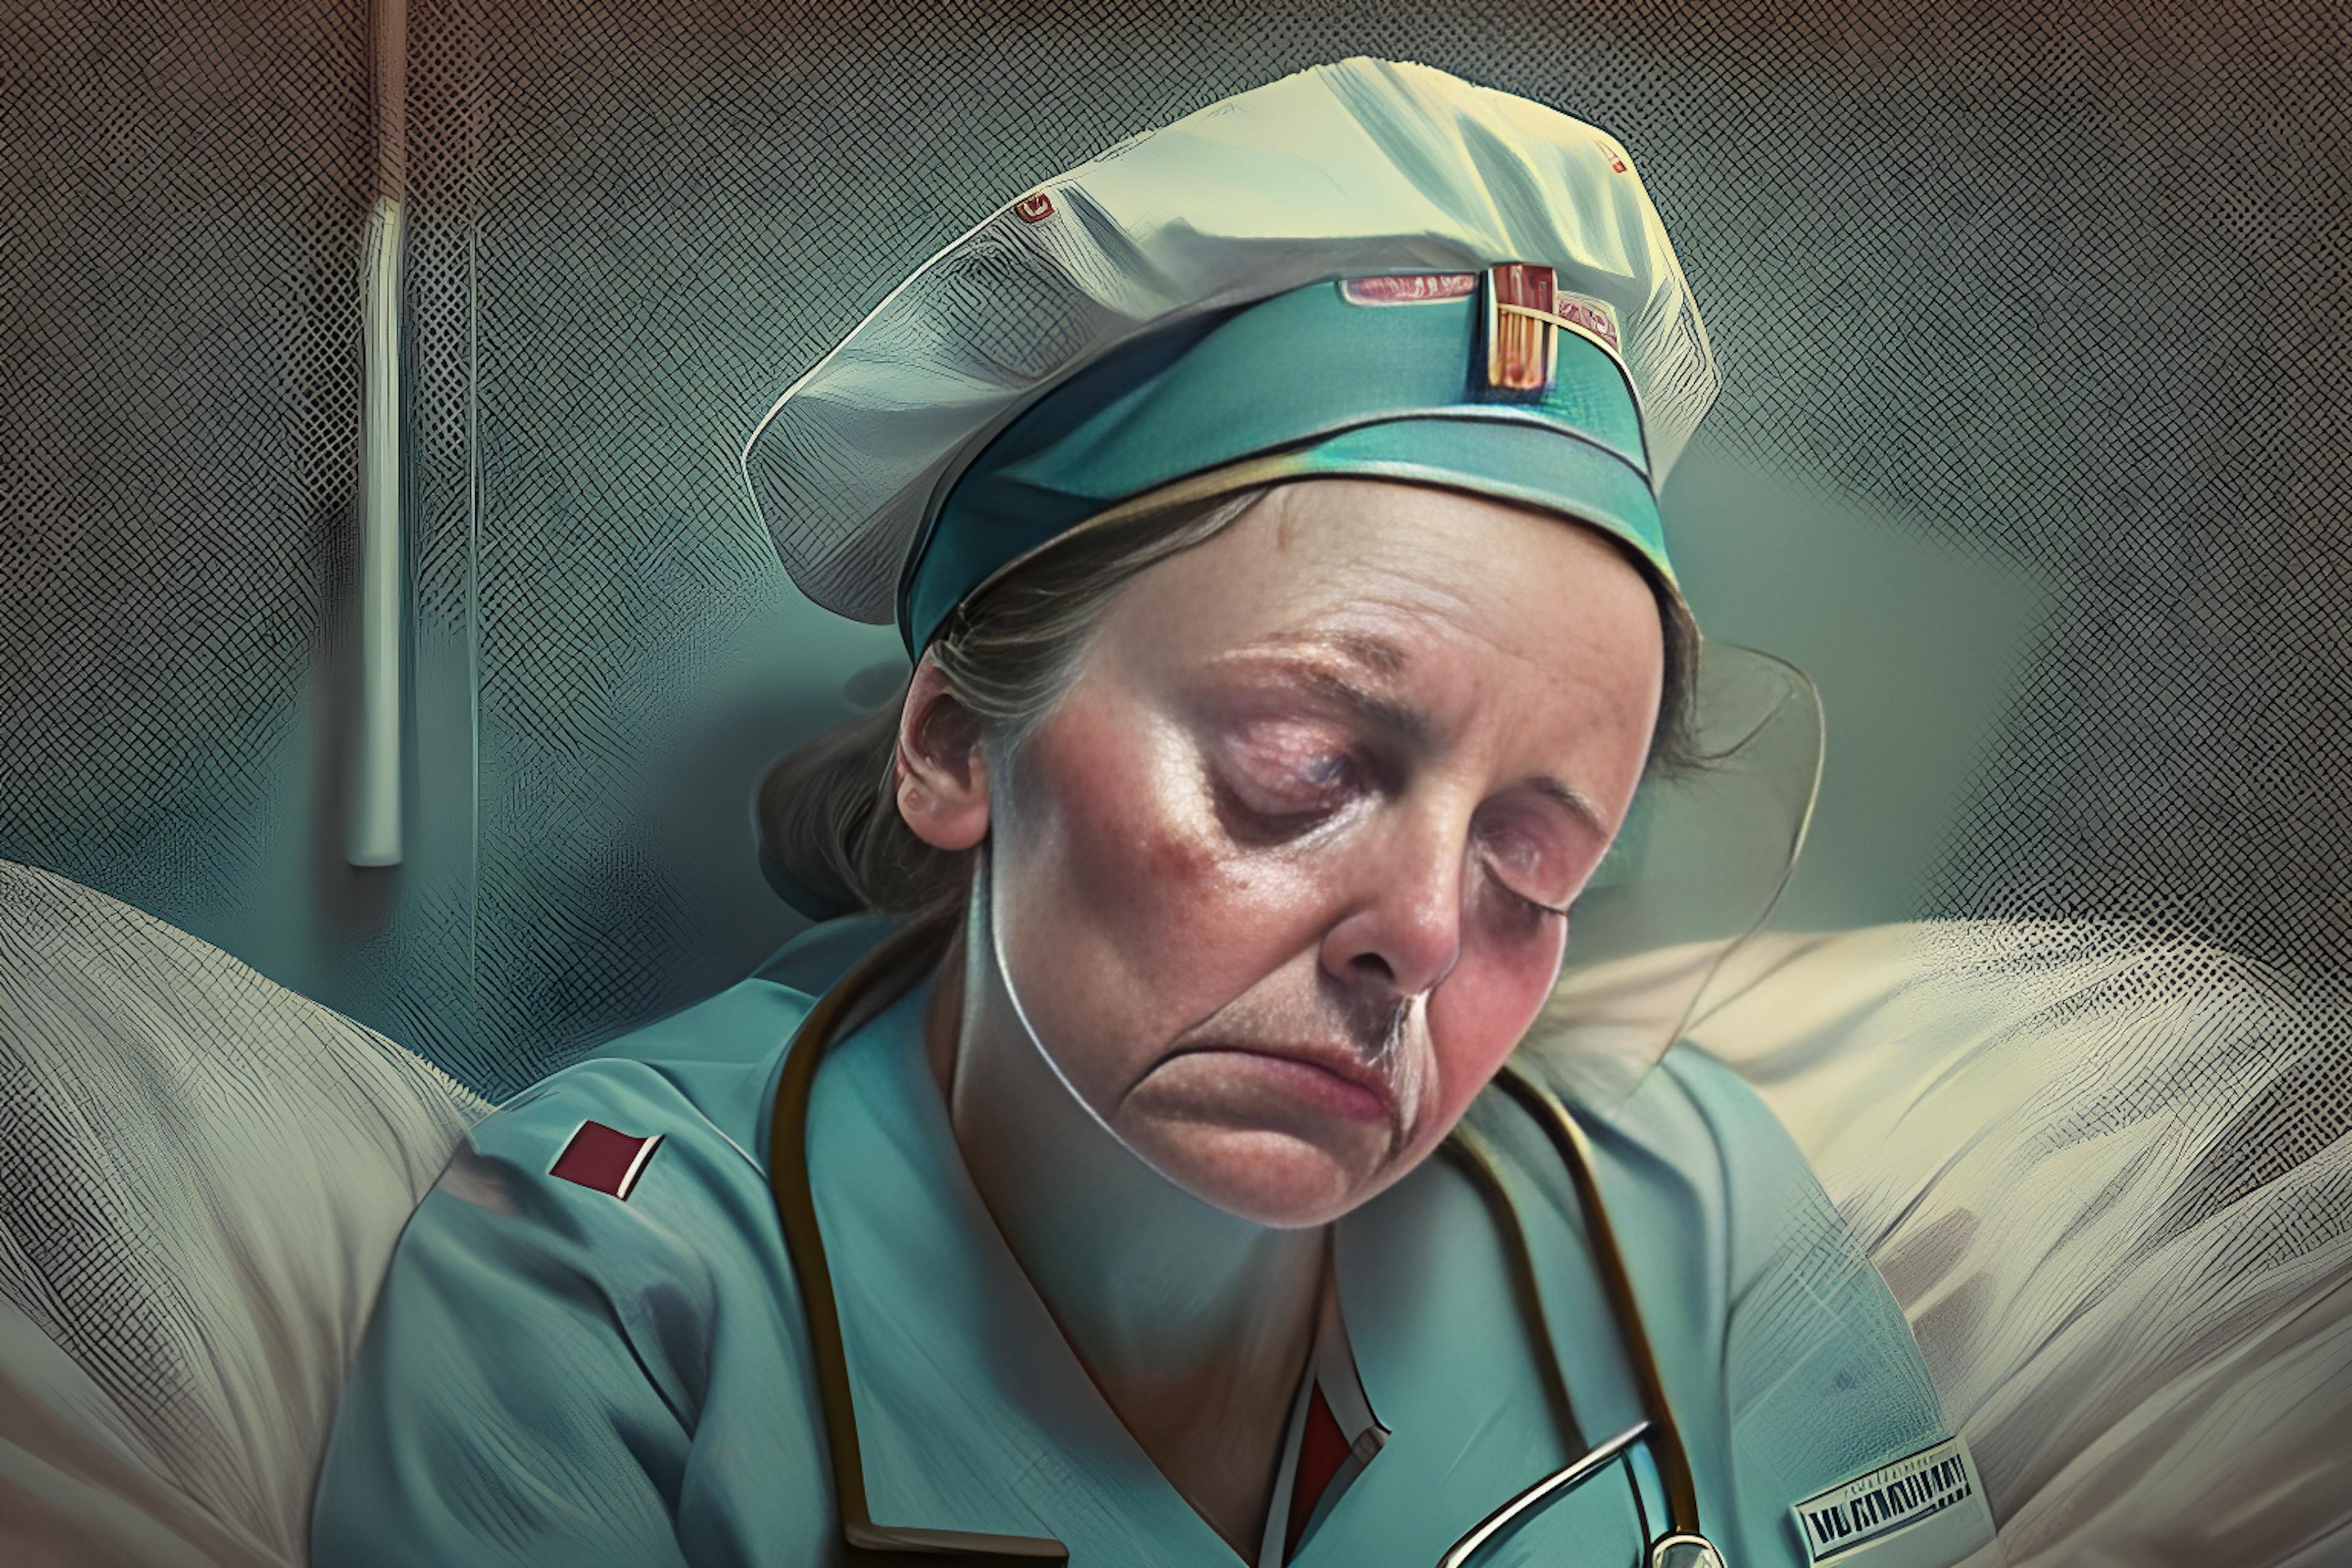 This image was generated by HackerNoon's AI Image Generator via the prompt "a tired nurse".